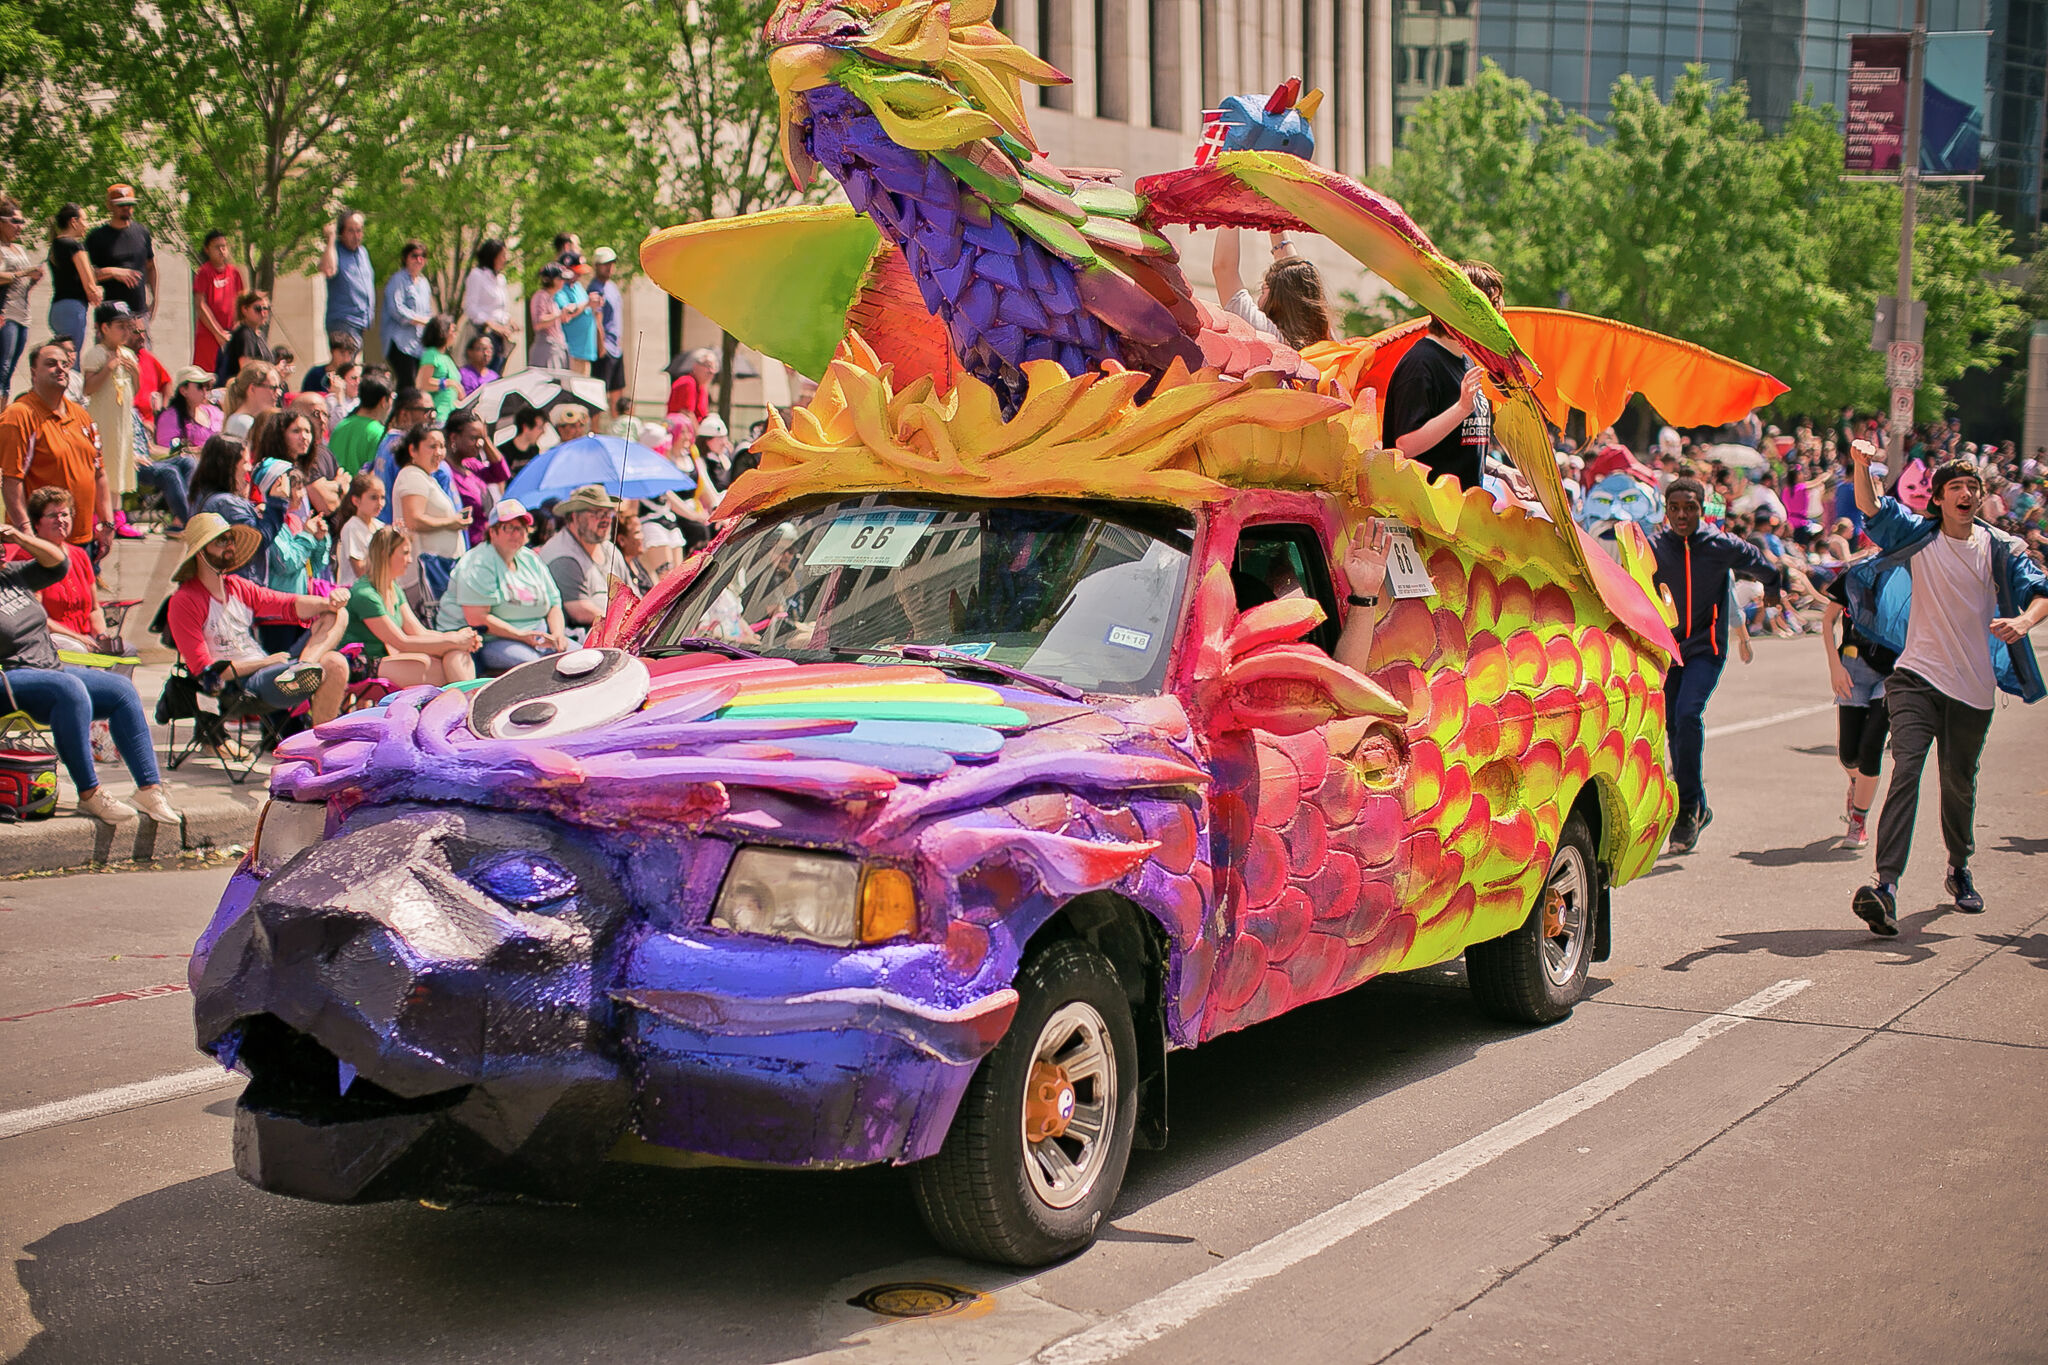 How to watch the Art Car Parade in Houston